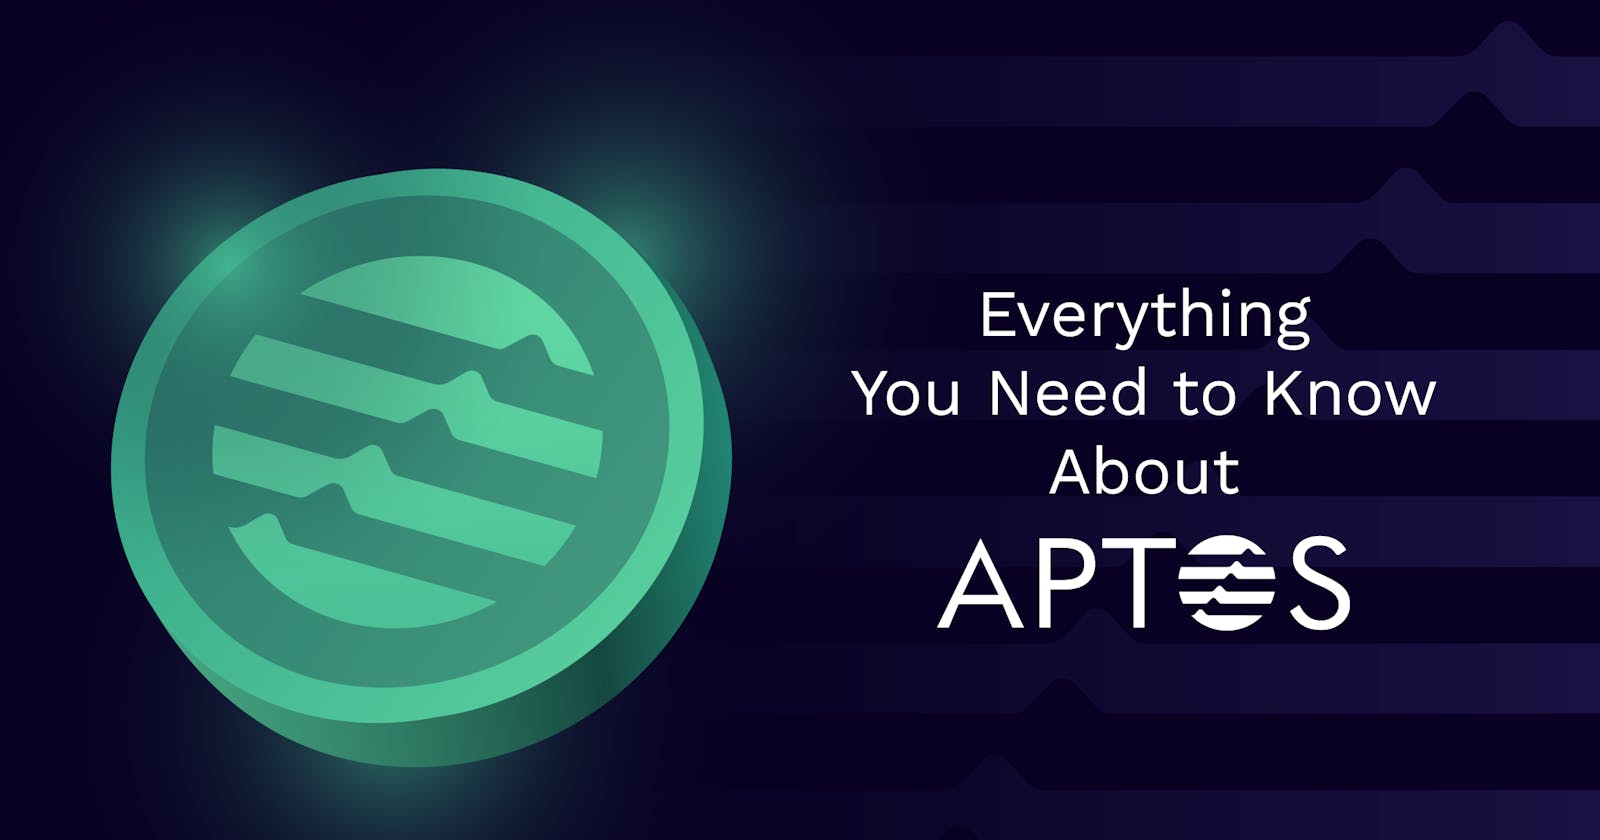 Aptos: Igniting the Blockchain Revolution with Unlimited Potential